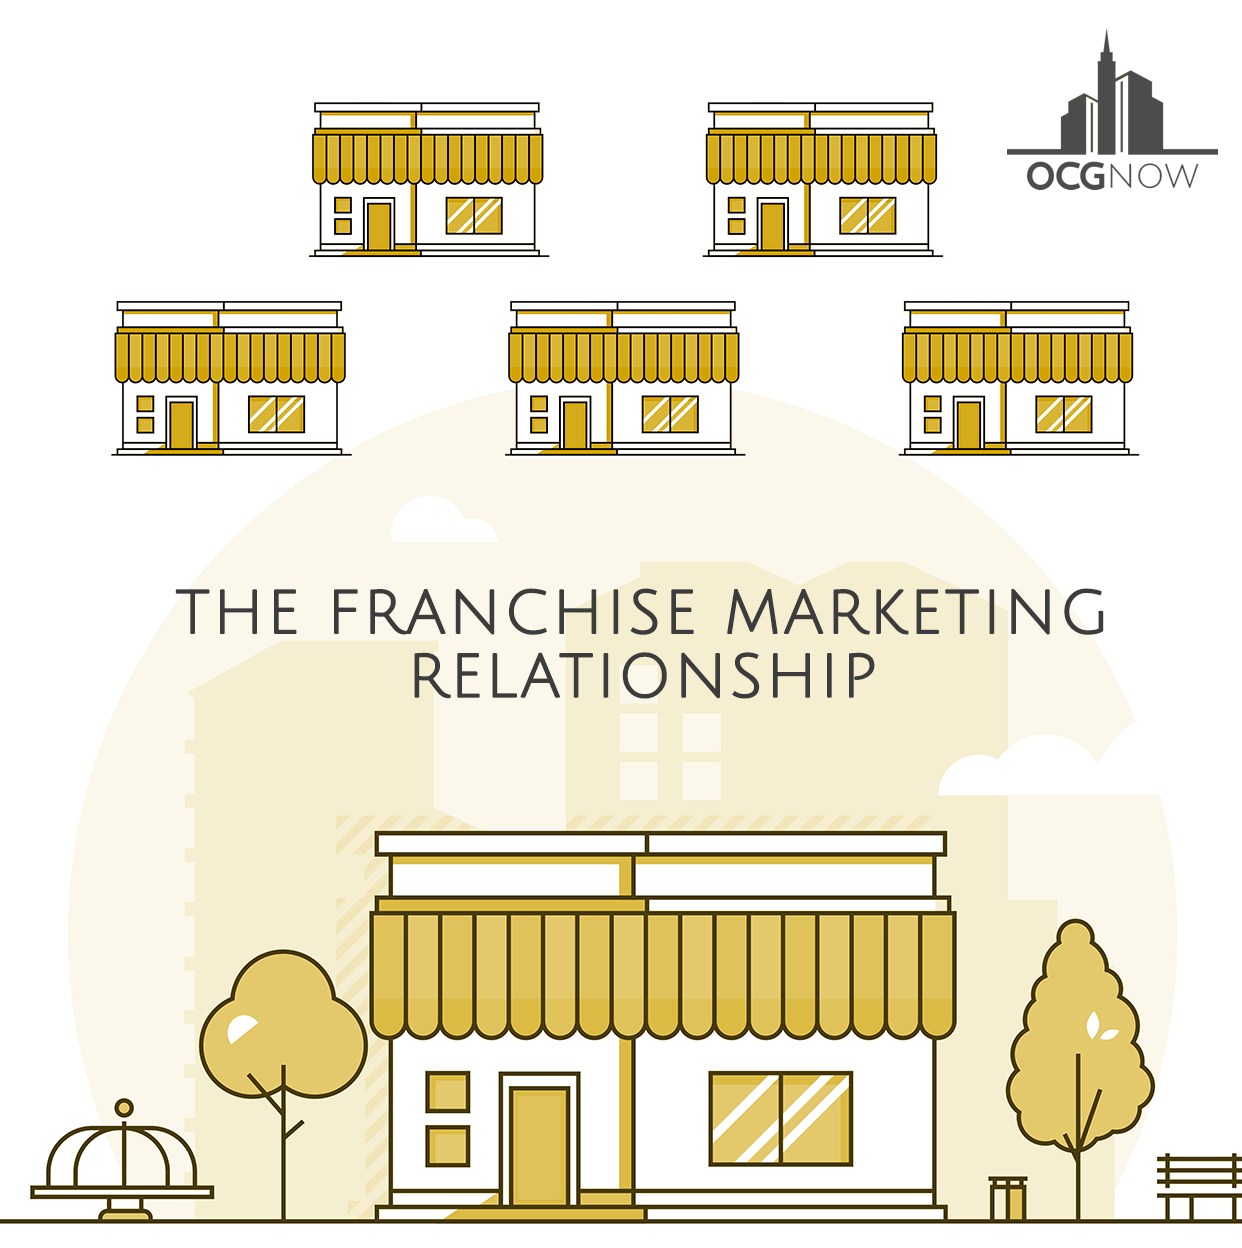 Local brick and mortar stores depicting franchise marketing